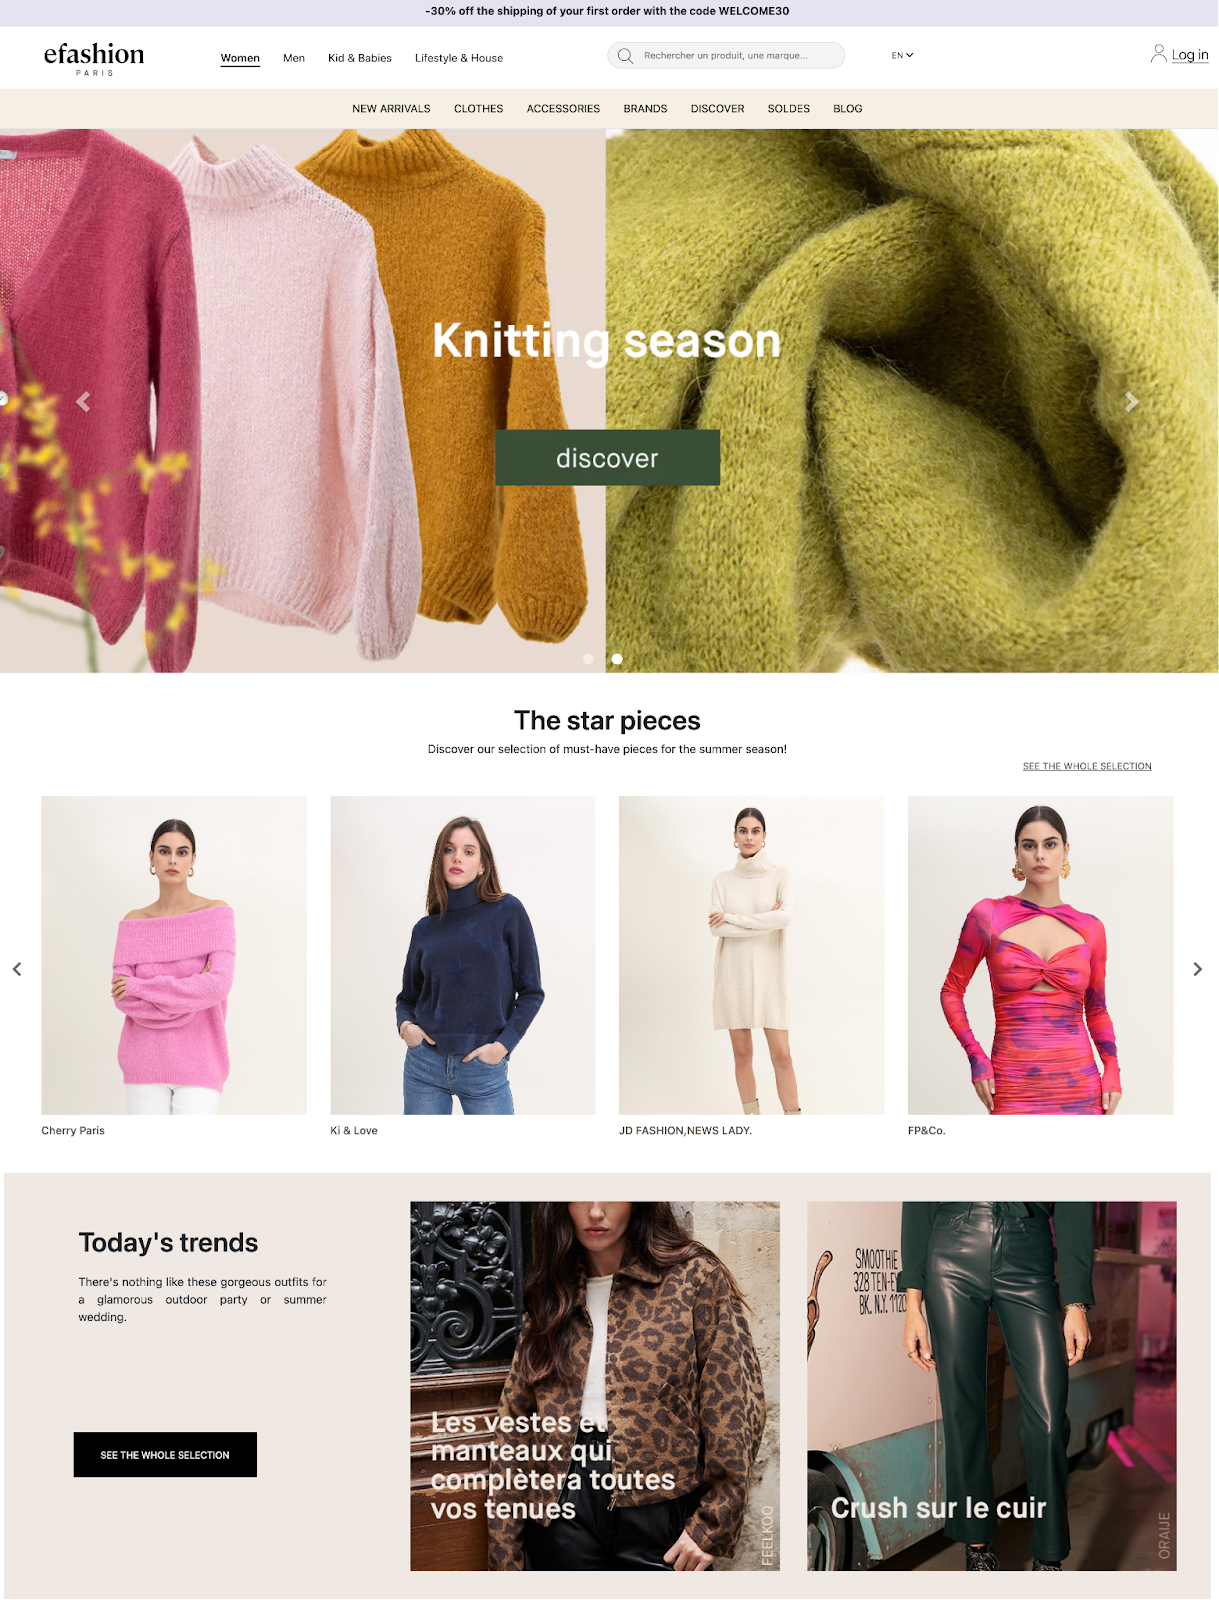 The eFashion Paris homepage with hero image of sweaters, a category of must-have products, and today’s trends